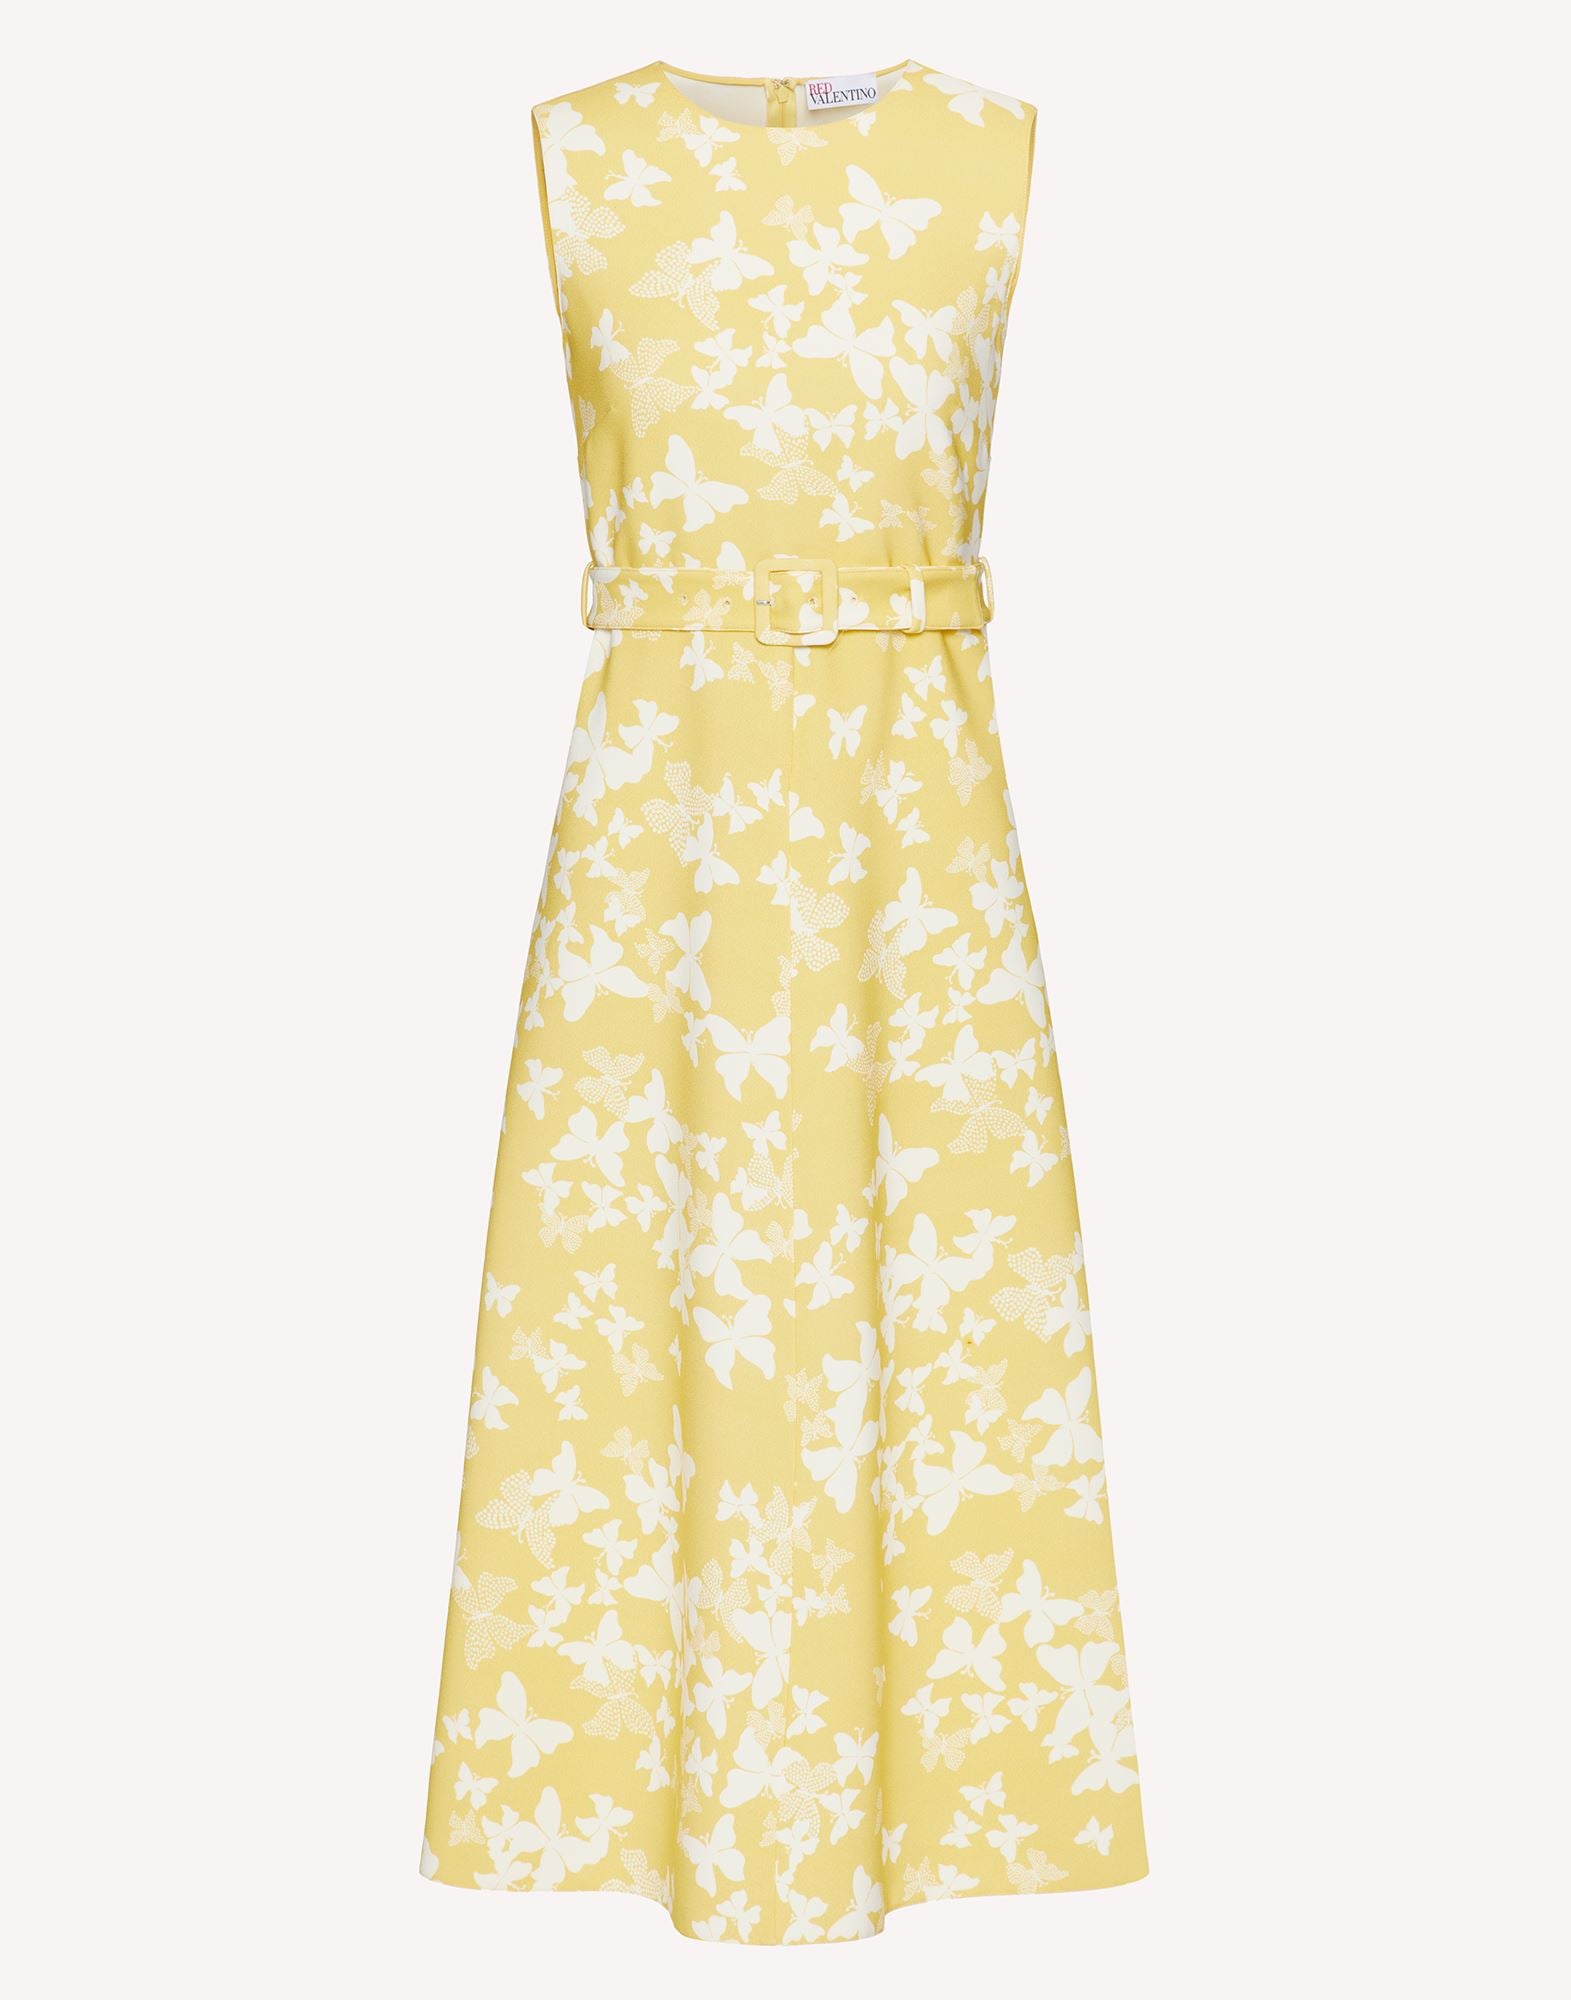 Butterfly Print Dress by Red Valentino